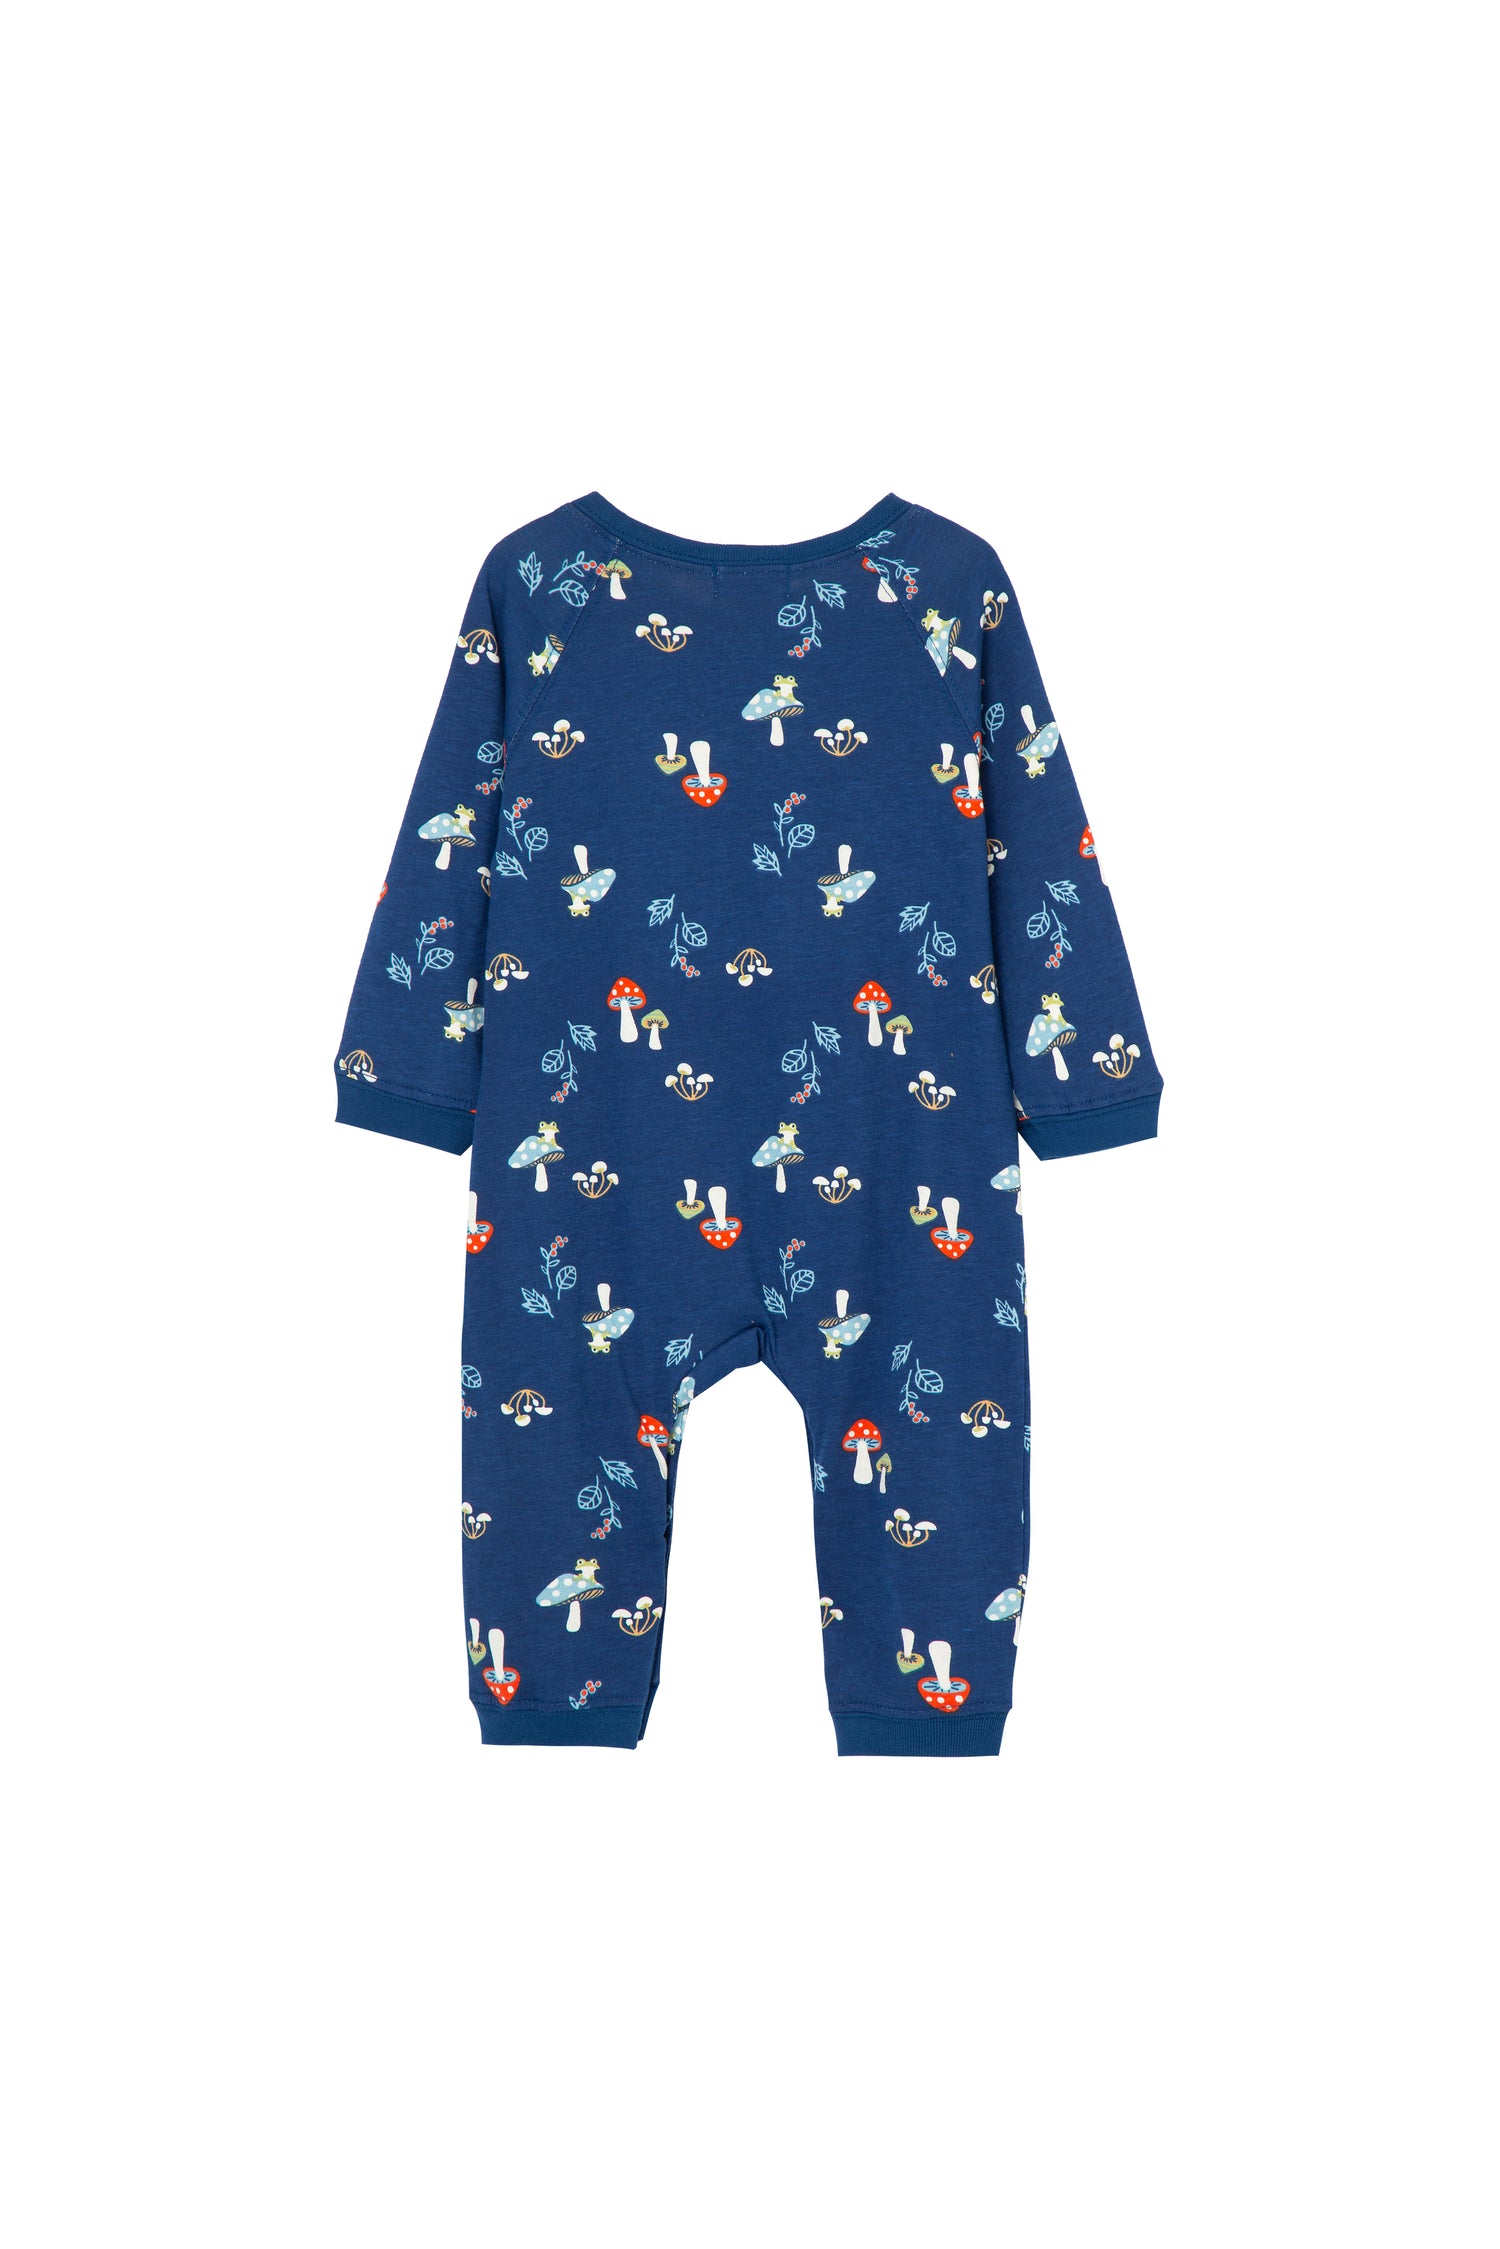 BACK OF DARK BLUE LONG-SLEEVE ONESIE COVERALL WITH MUSHROOM GRAPHICS